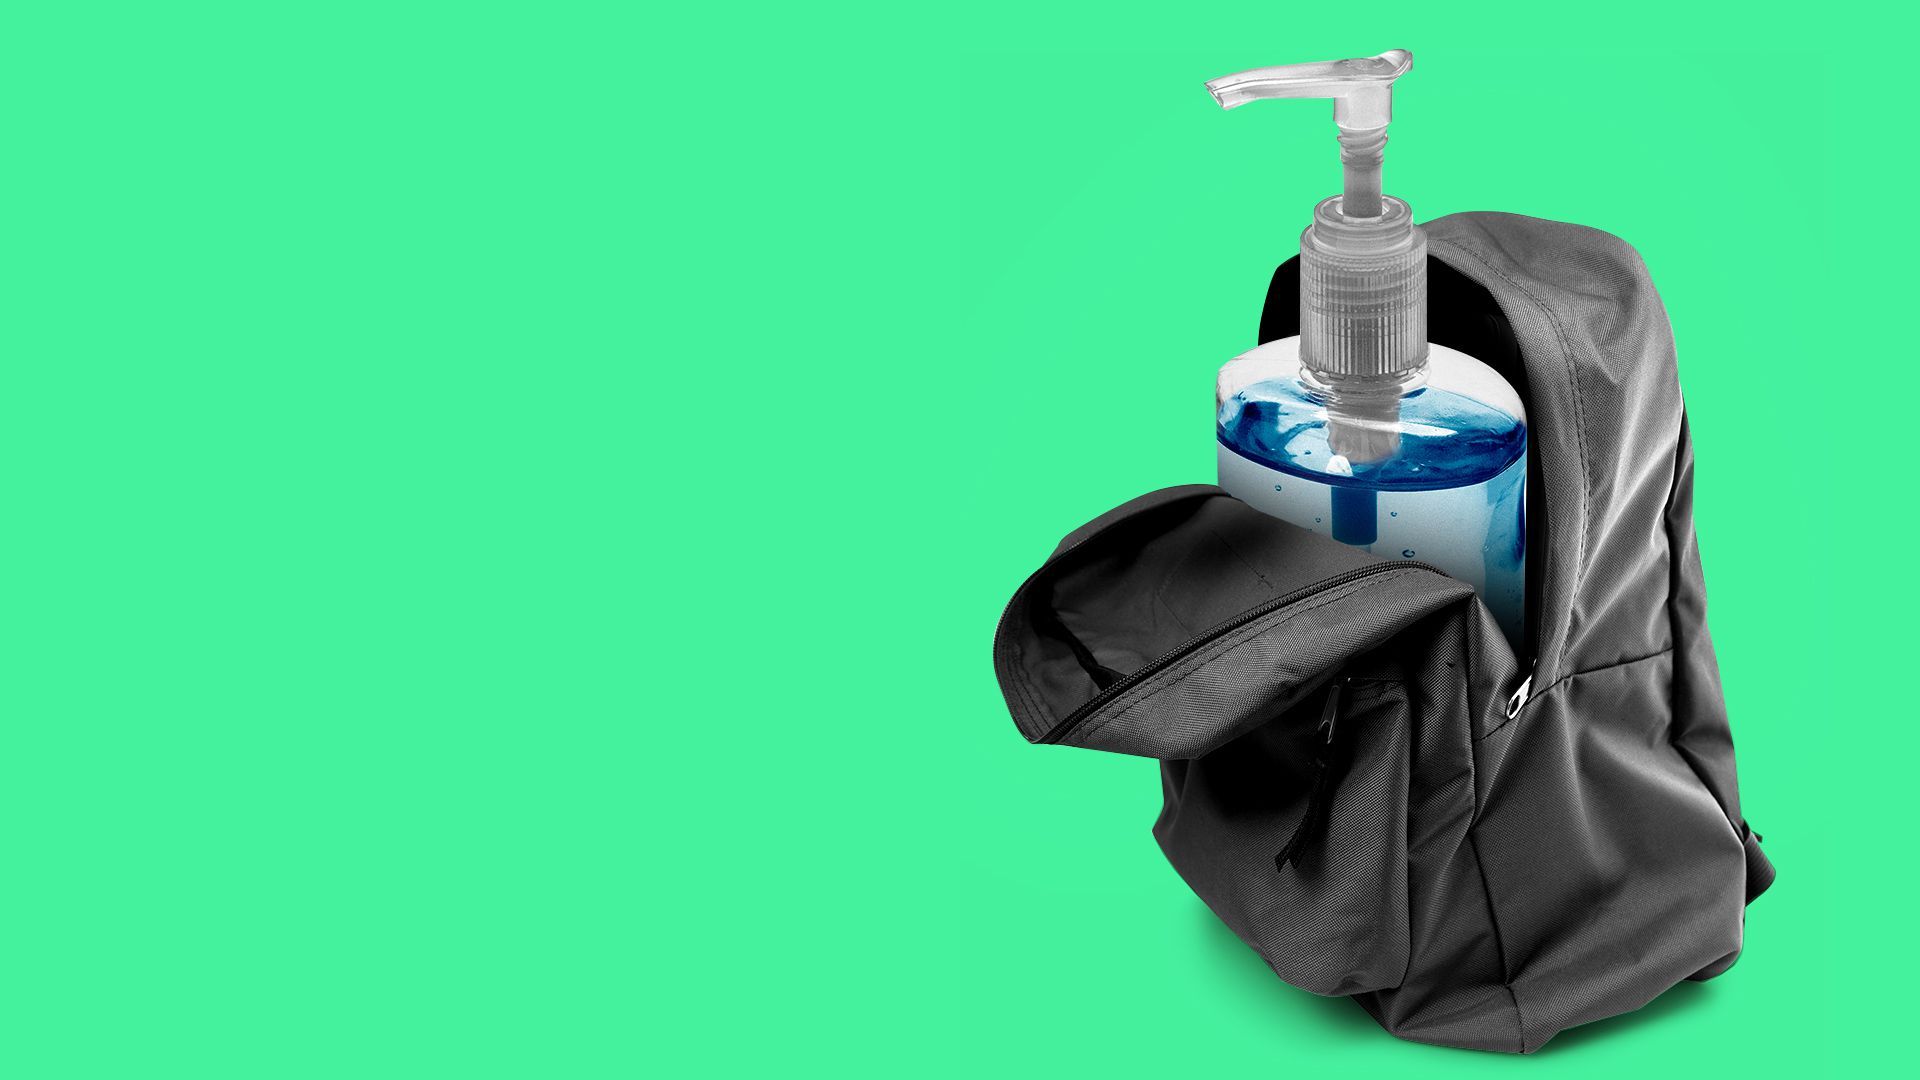 Illustration of an open backpack with a giant bottle of hand sanitizer in it